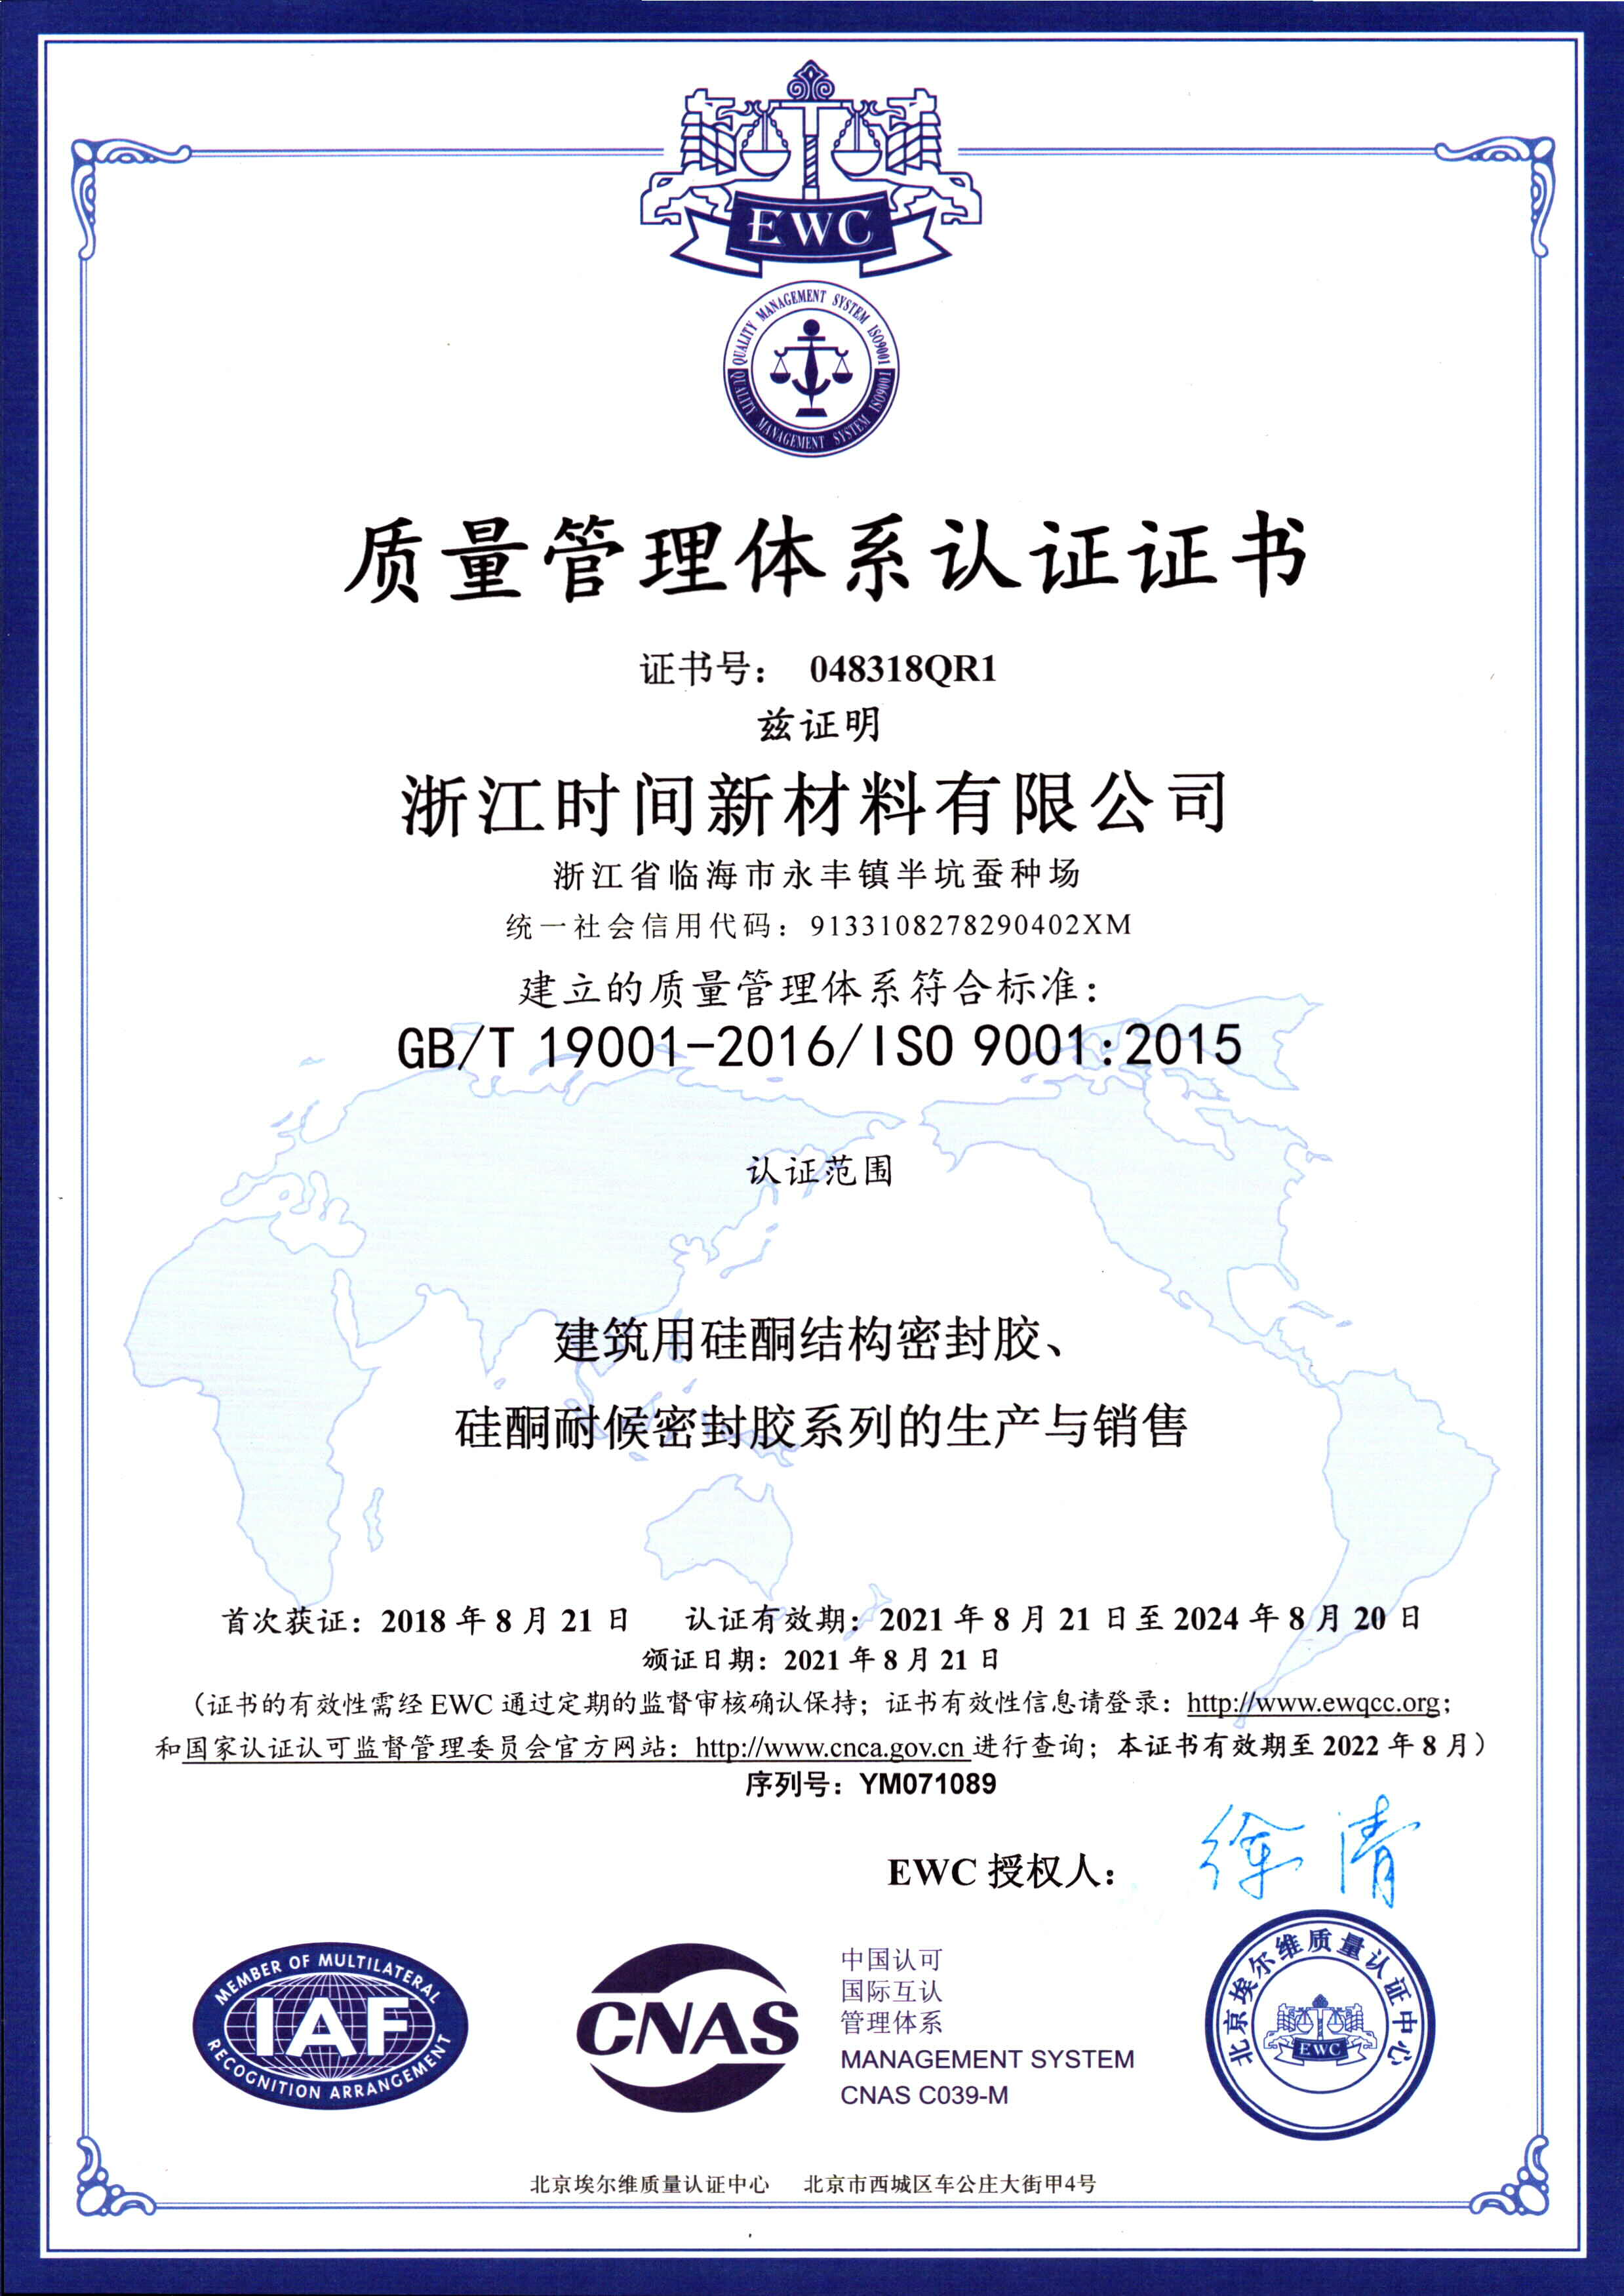 Iso9001:2015 quality management system certificate Chinese (2021)